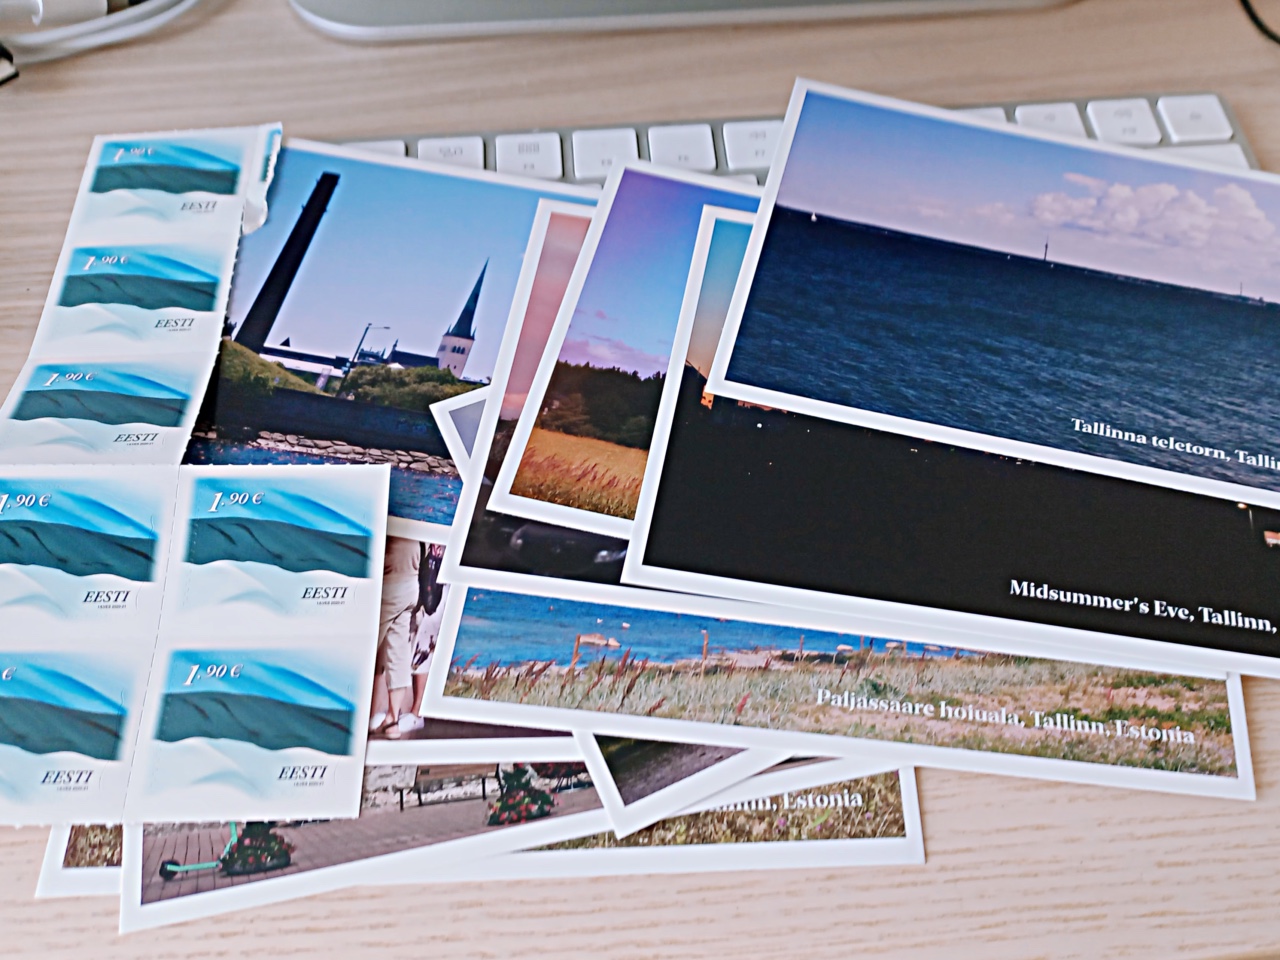 The postcards that I sent from Estonia.